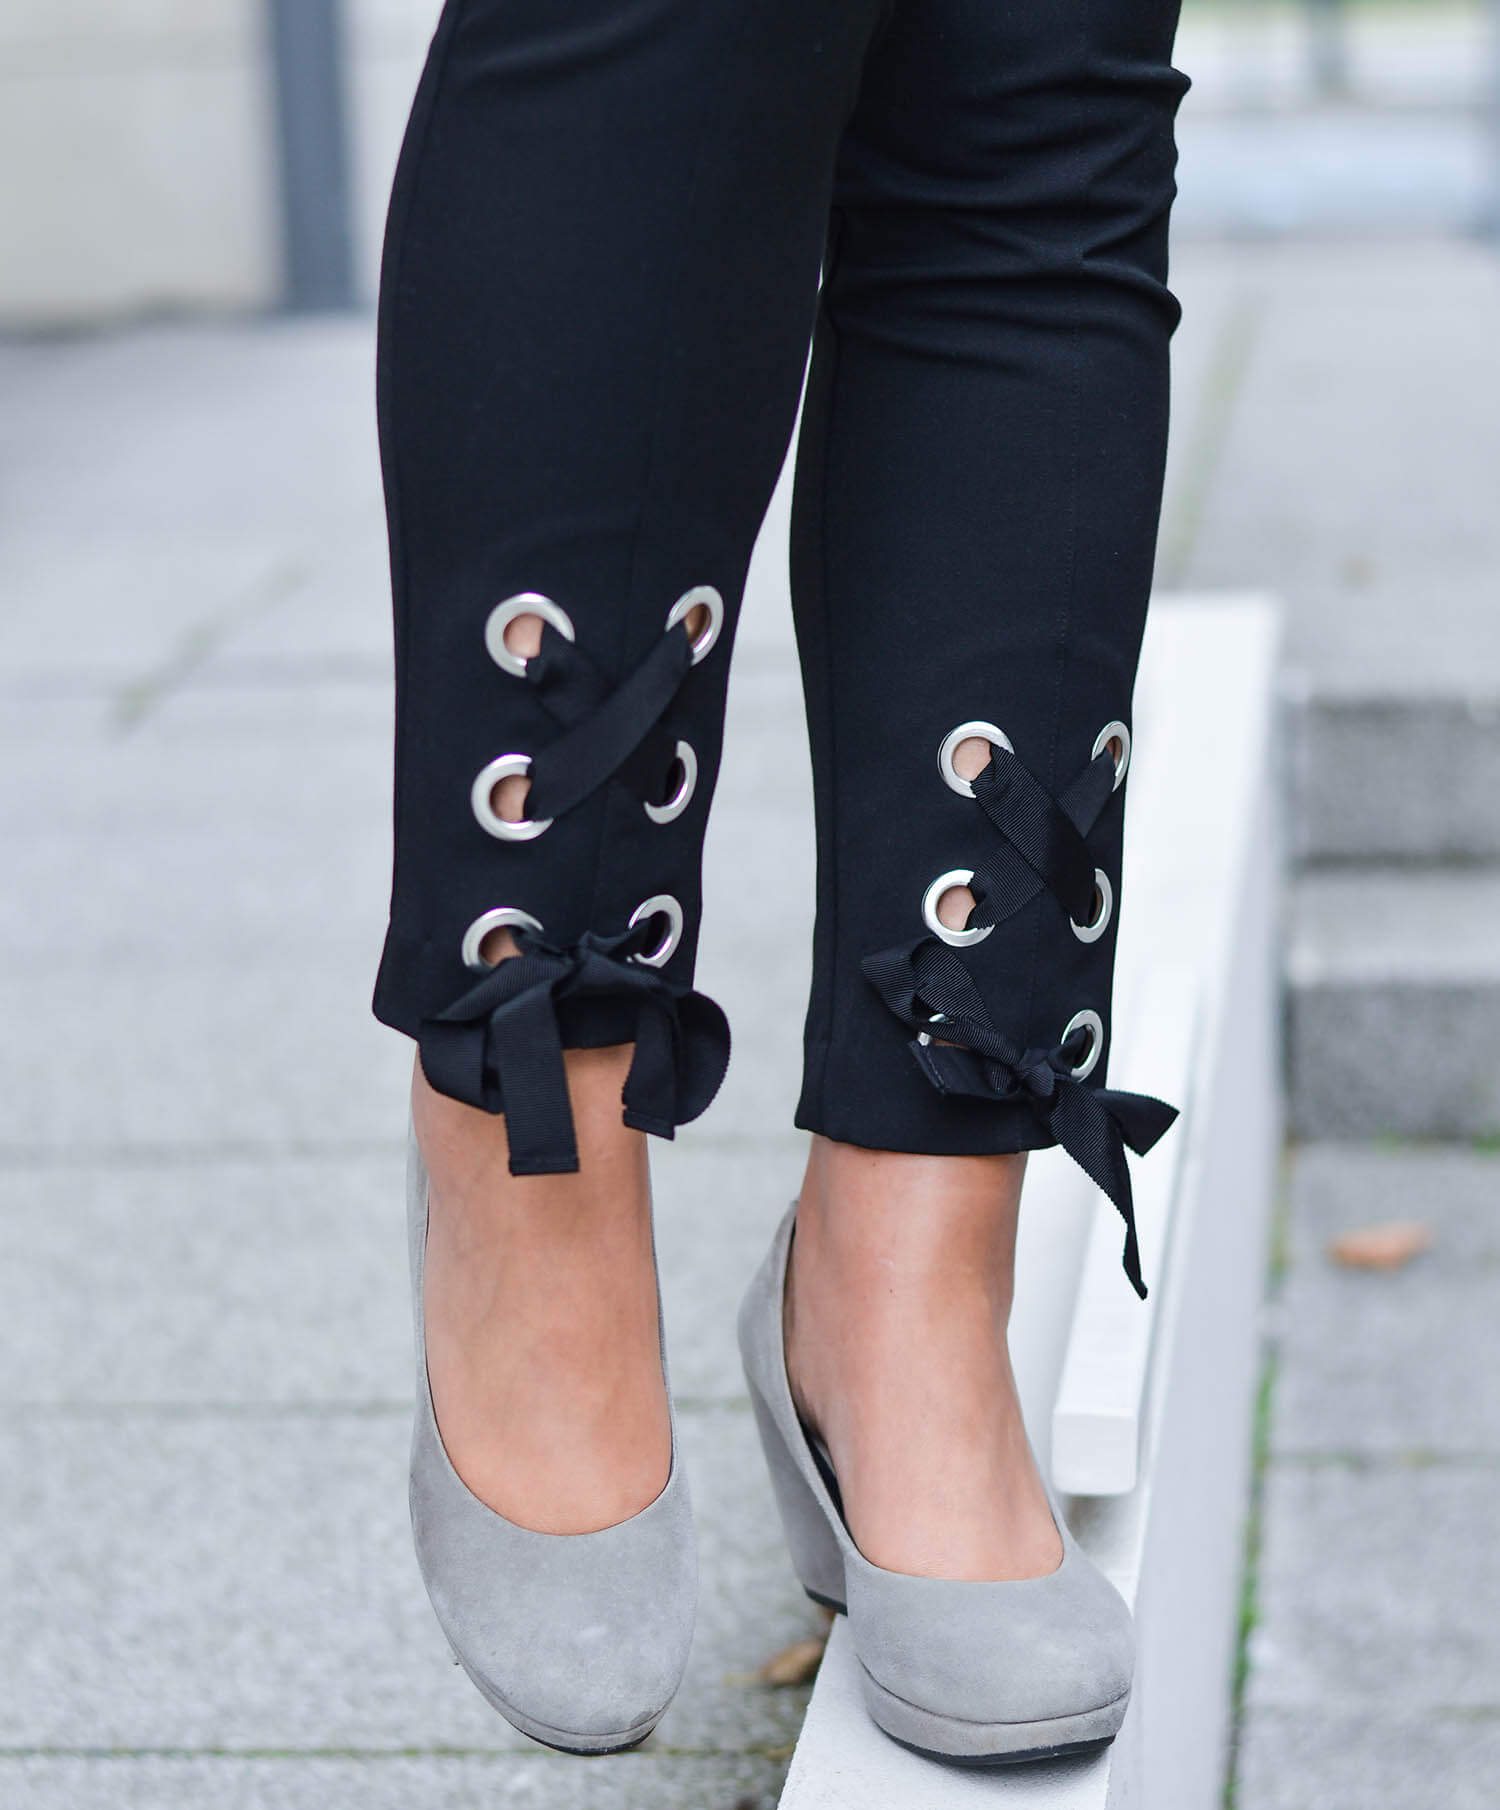 Kationette-fashionblog-nrw-Outfit-Black-and-White-Bow-Pants-Blazer-Lagerfeld-Shirt-streetstyle